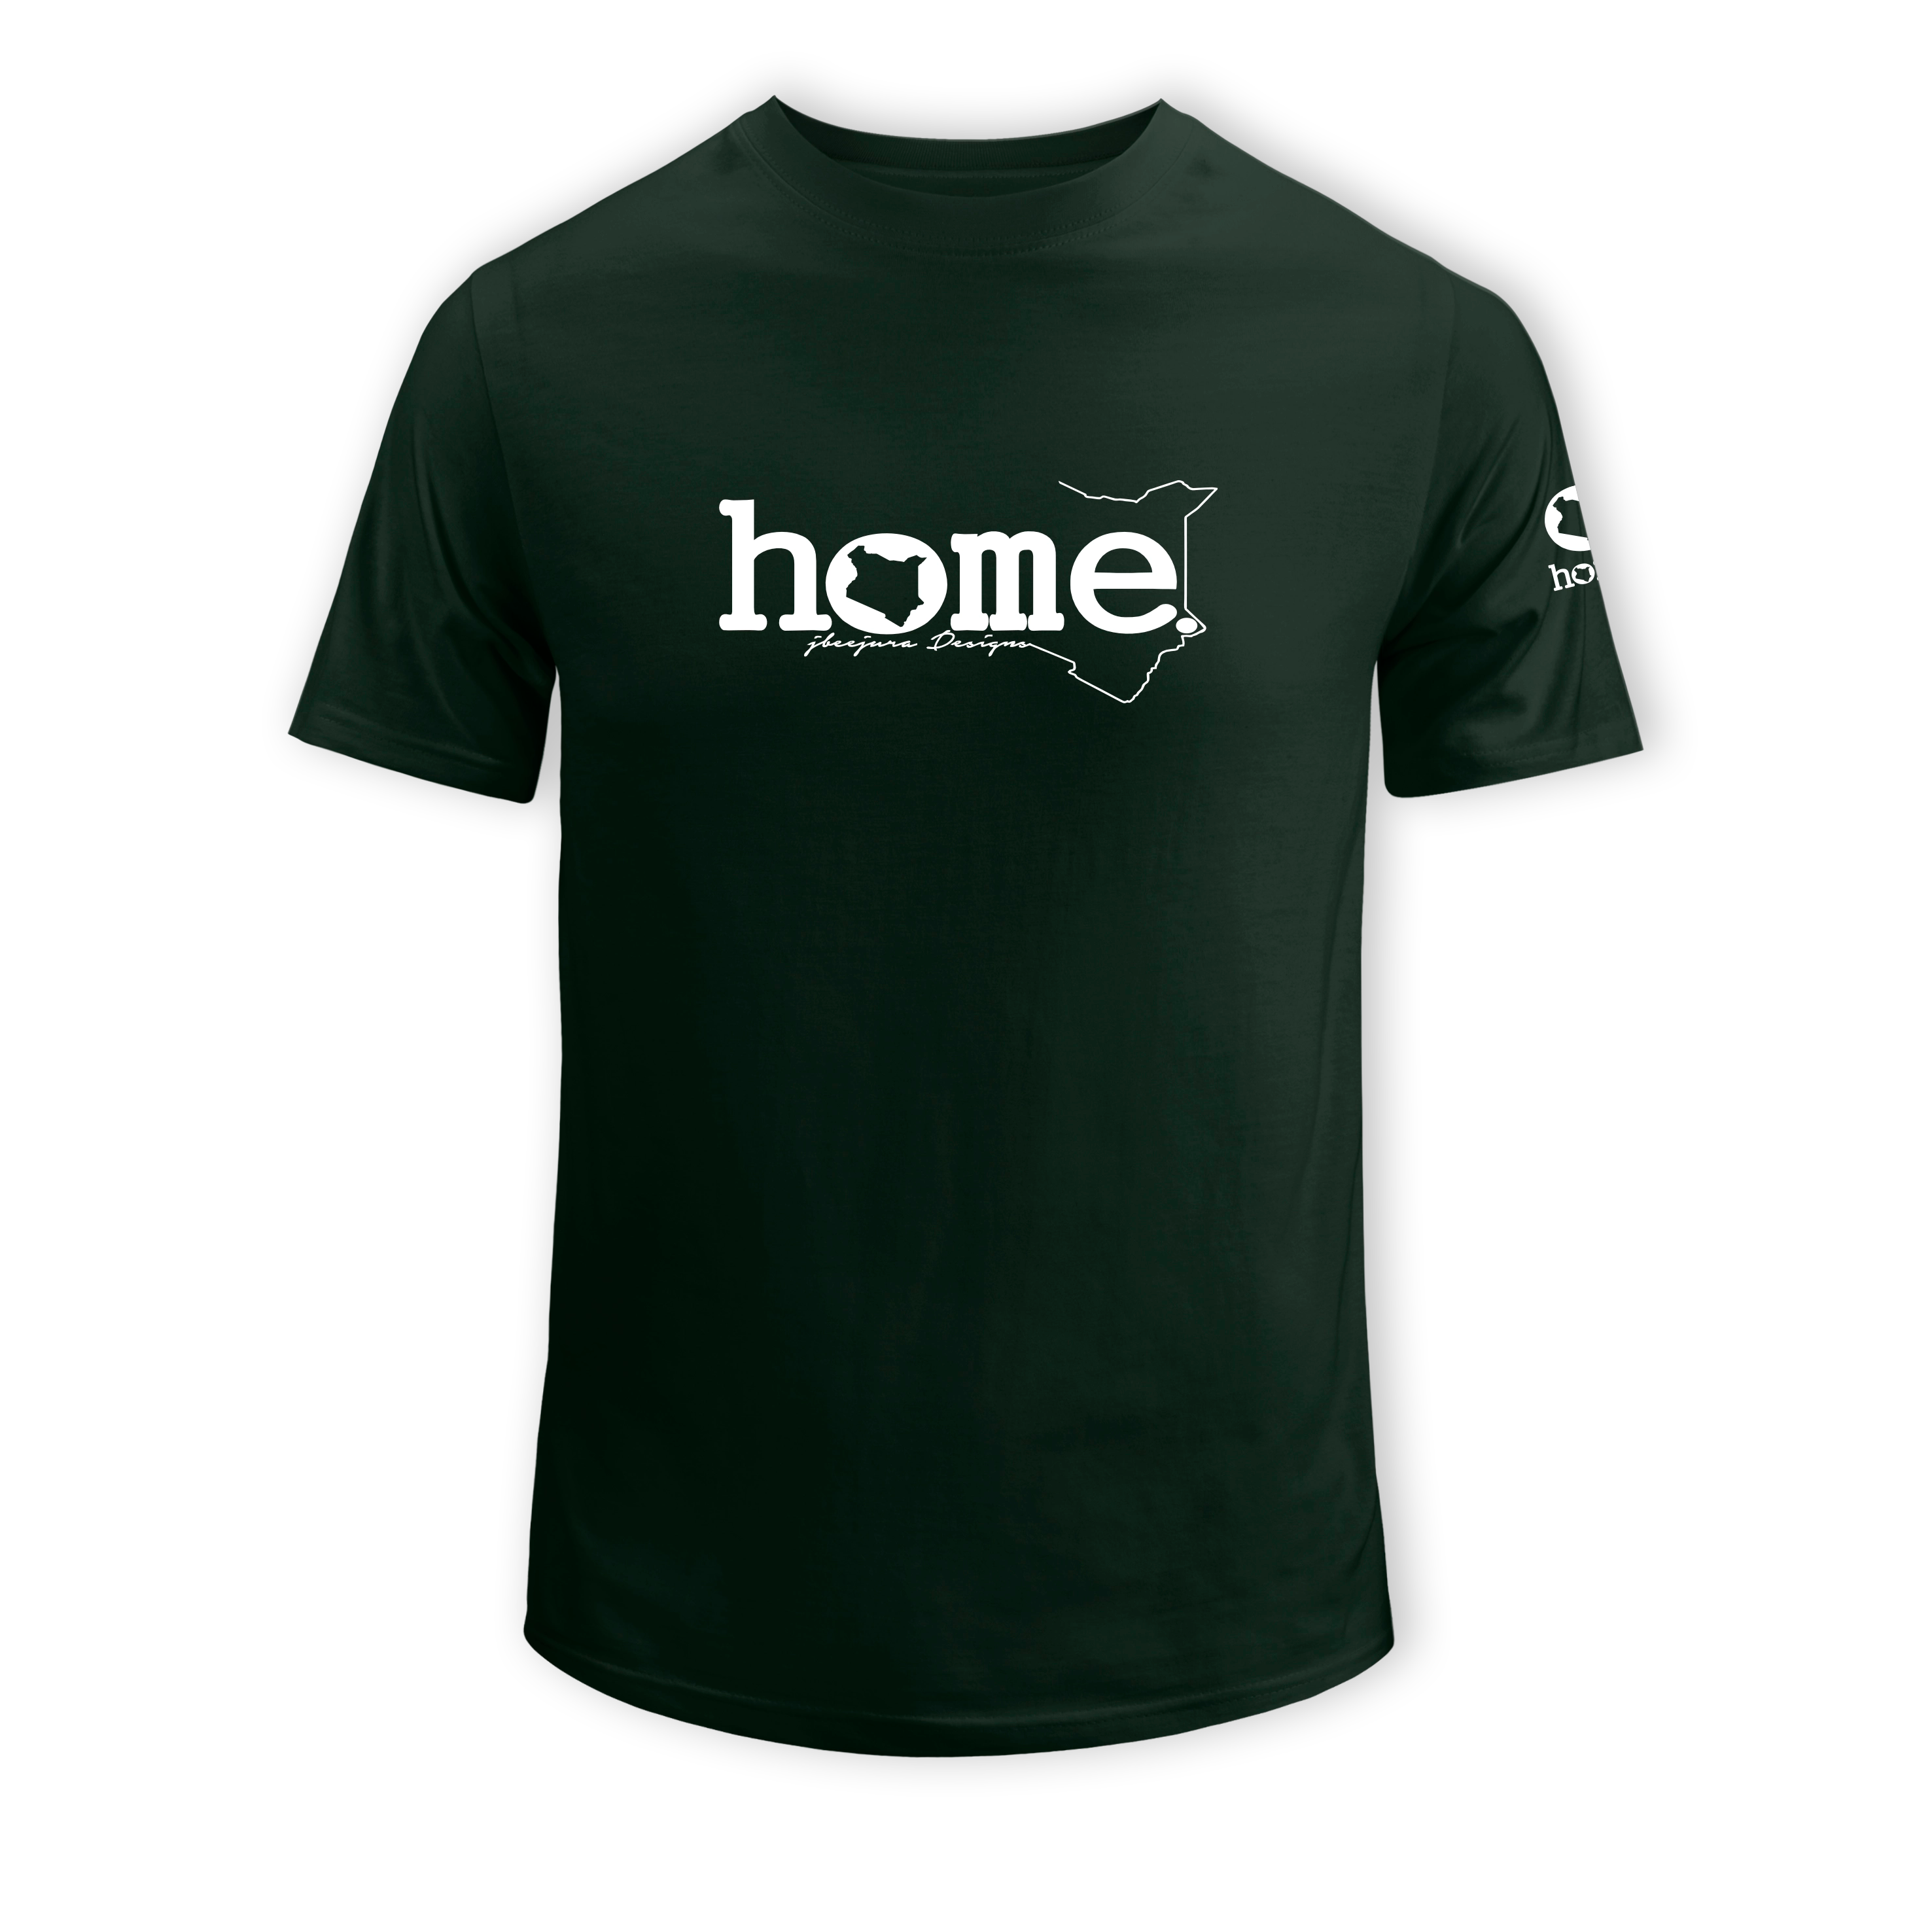 home_254 SHORT-SLEEVED FOREST GREEN T-SHIRT WITH A WHITE CLASSIC WORDS PRINT – COTTON PLUS FABRIC